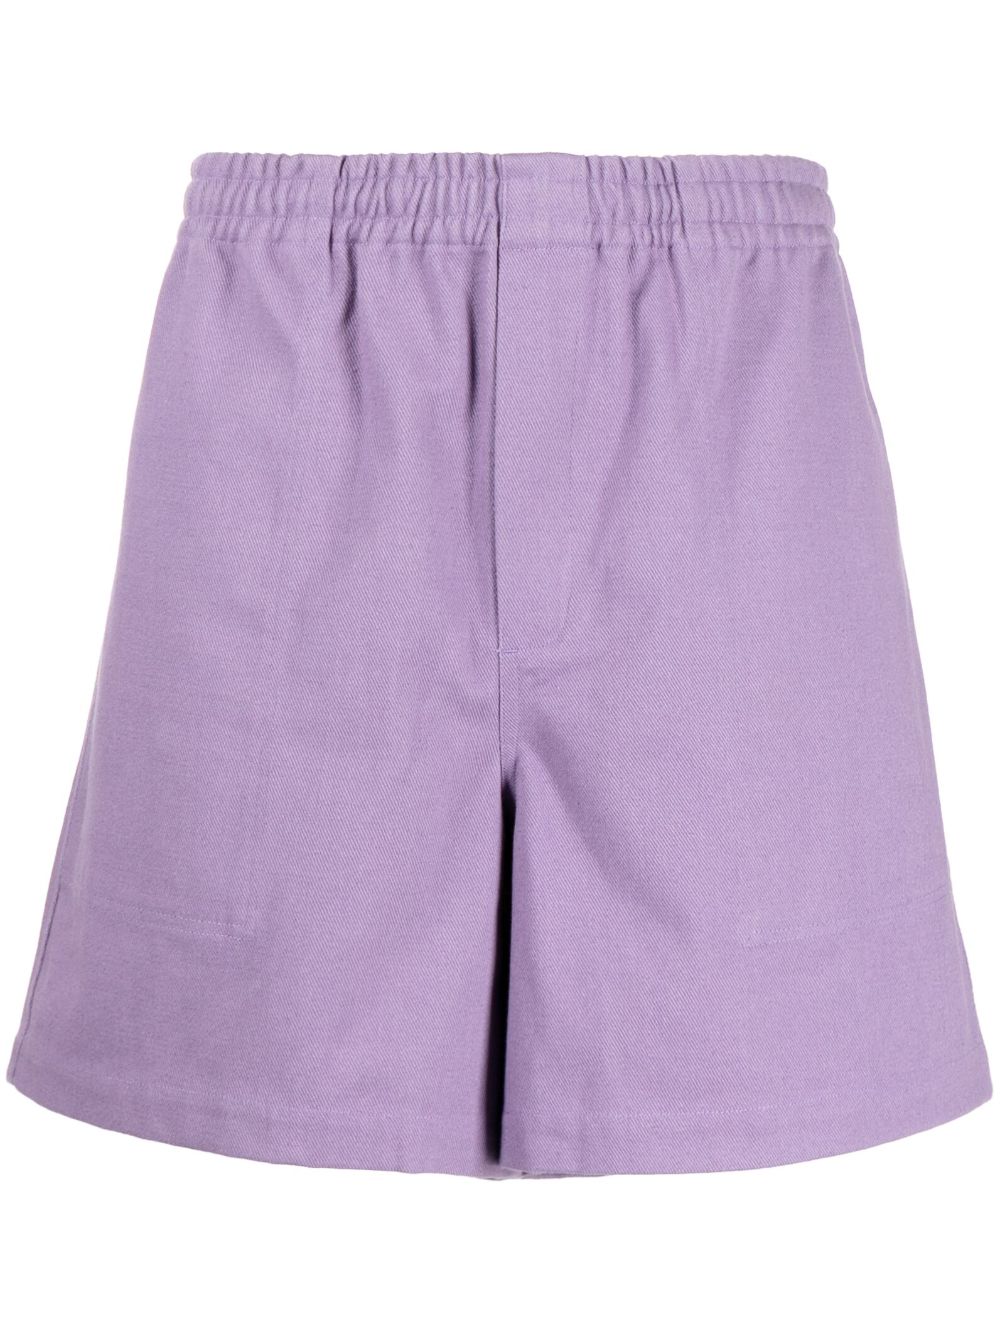 BODE twill rugby shorts - Purple